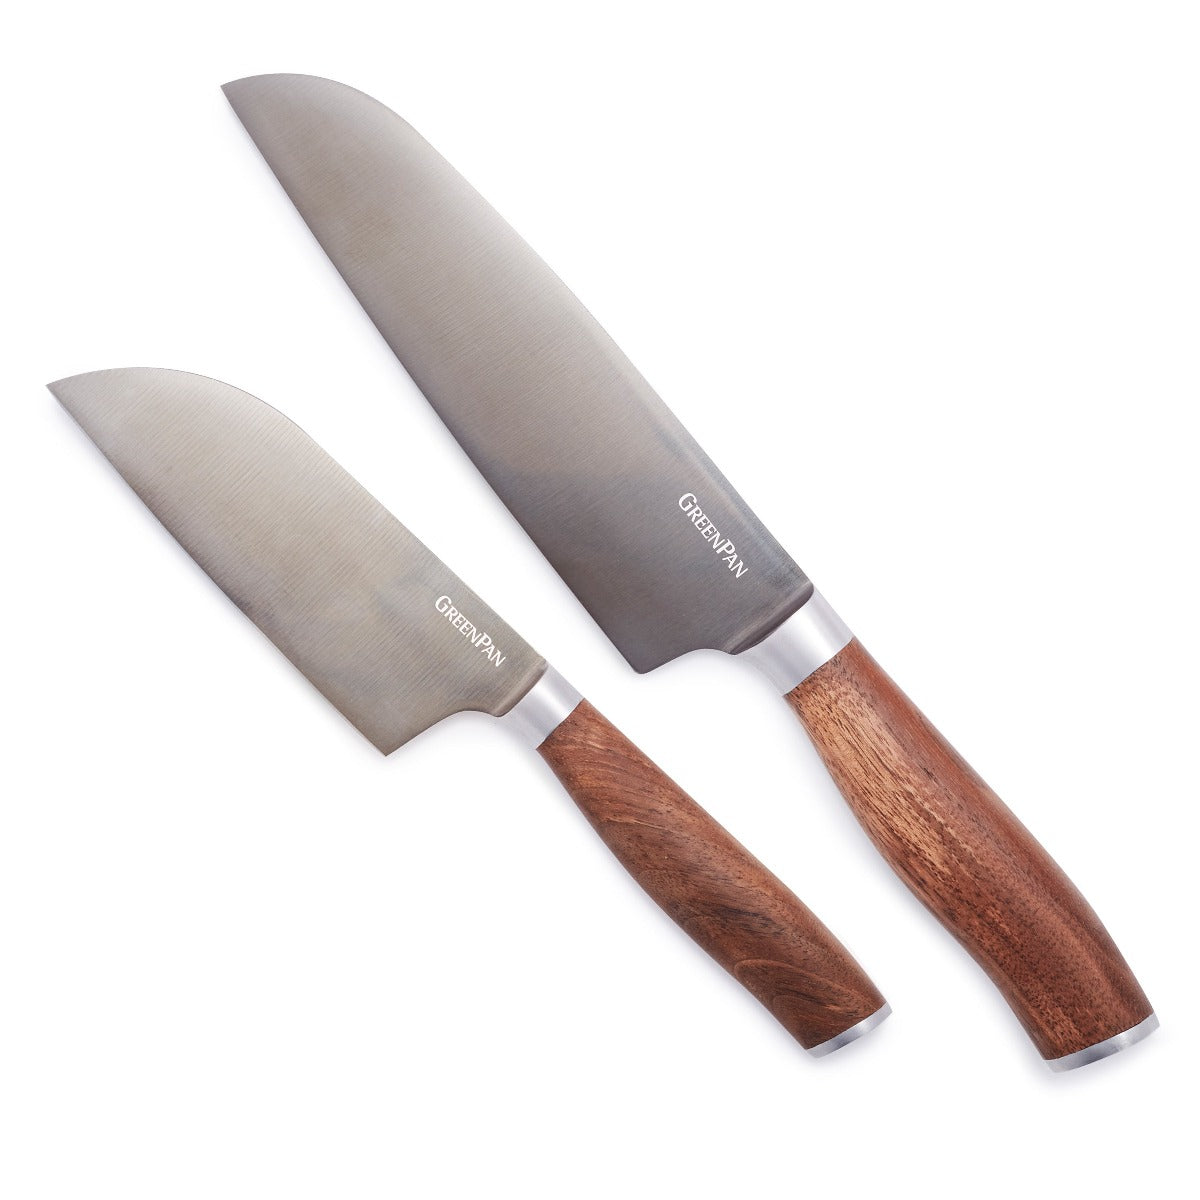 Dura Living EcoCut 2-Piece Santoku Knife Set - High Carbon Stainless Steel Blades, Sustainable Ergonomic Handles, Eco-Friendly Knives with Sheaths